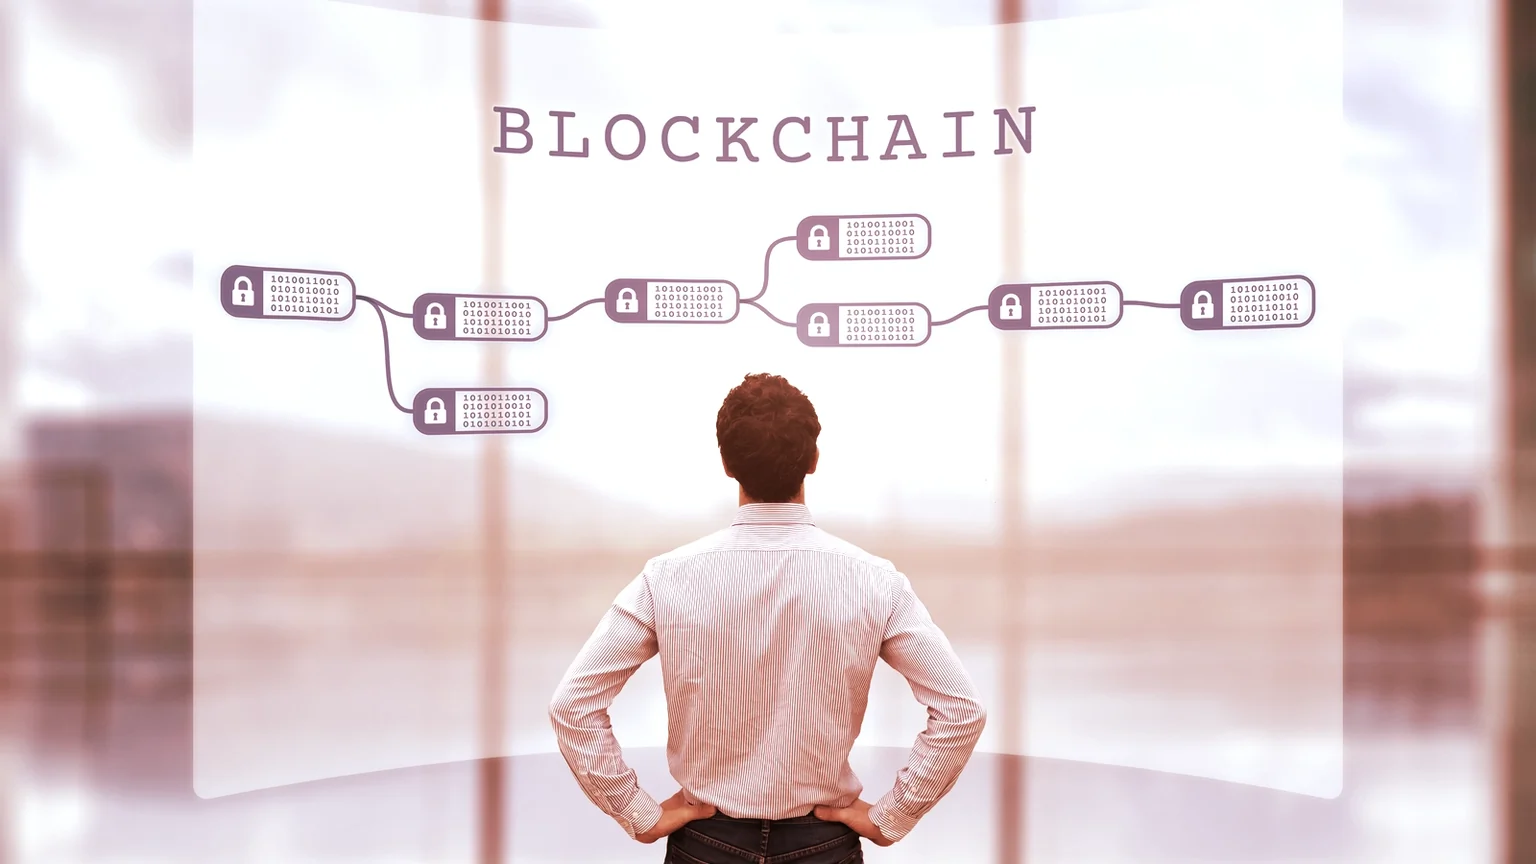 Companies around the world are accelerating their blockchain adoption. Image: Shutterstock